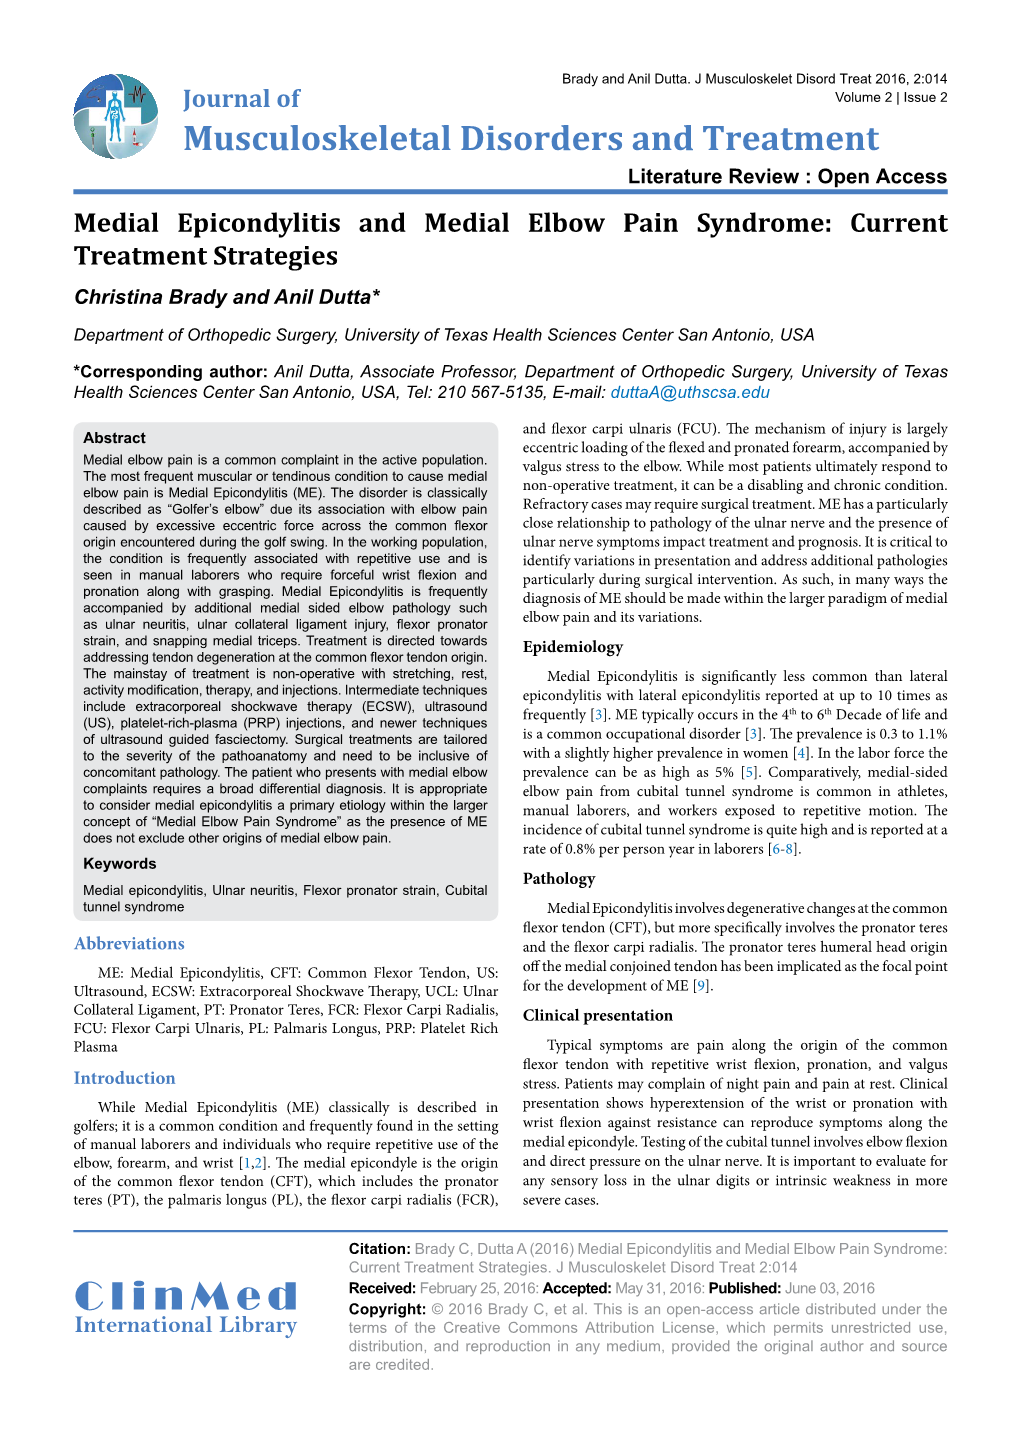 Medial Epicondylitis and Medial Elbow Pain Syndrome: Current Treatment Strategies Christina Brady and Anil Dutta*